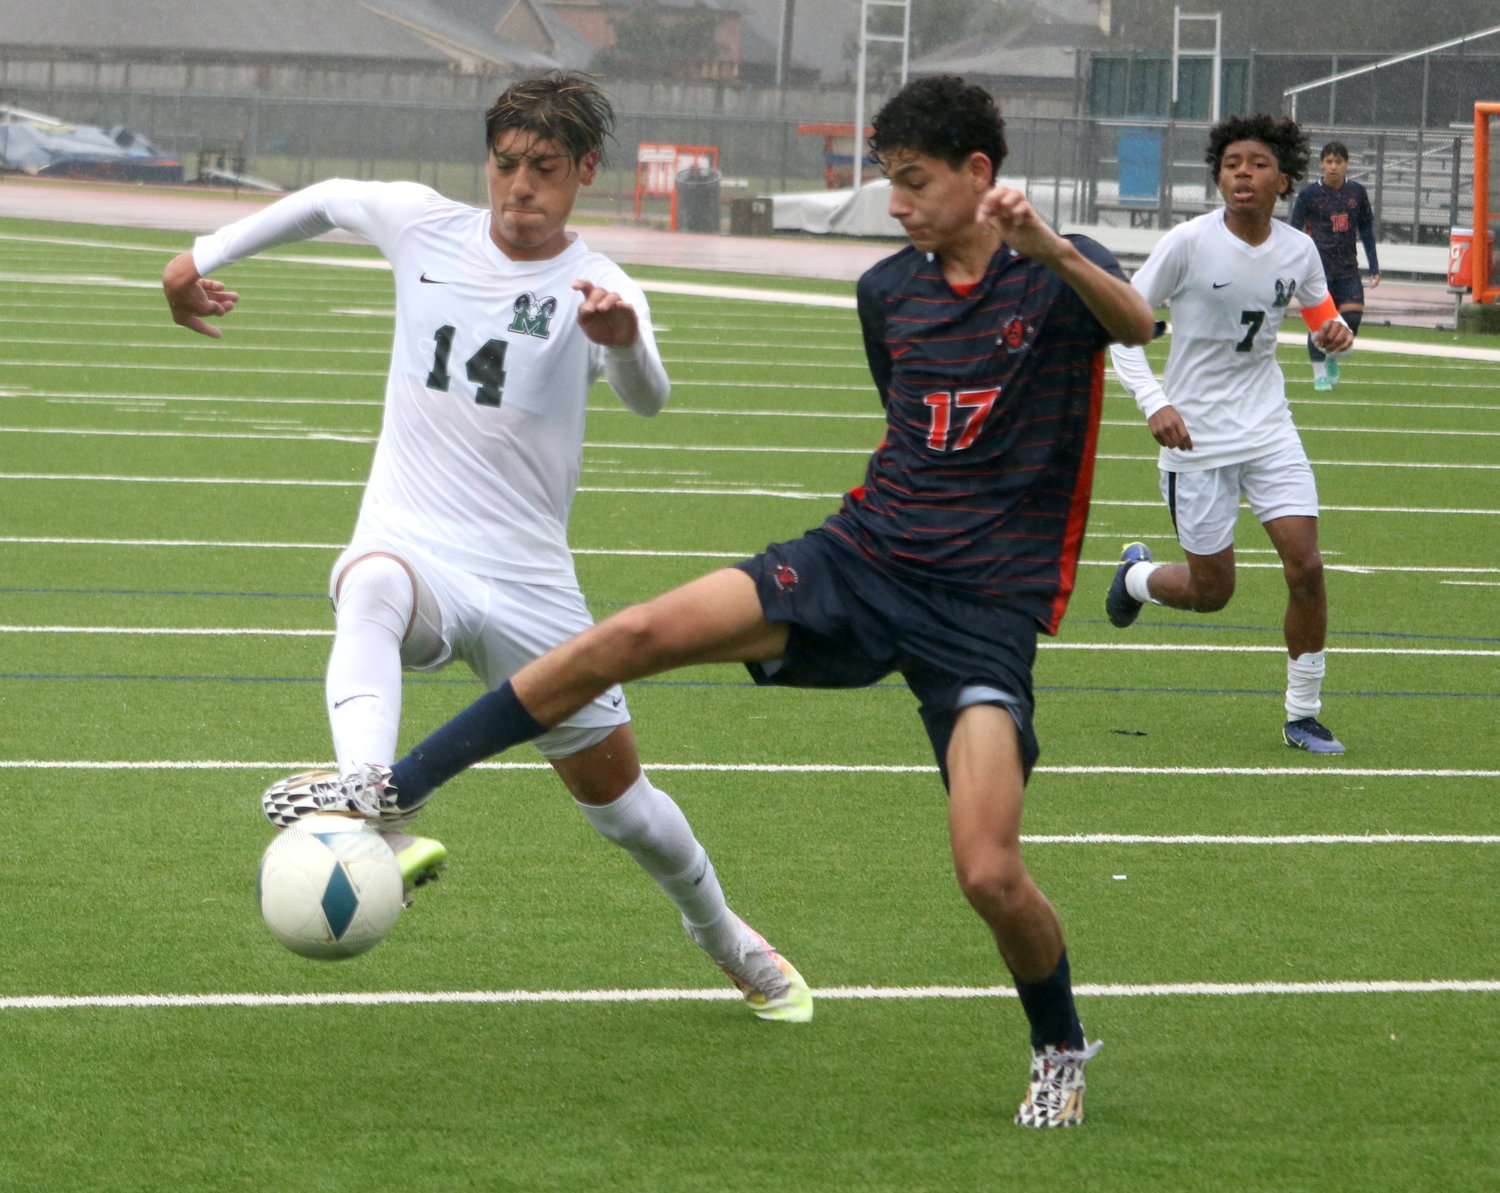 Sean Carlos Rivera tries to bring in a pass during Saturday's game between Seven Lakes and Mayde Creek at the Seven Lakes soccer field.